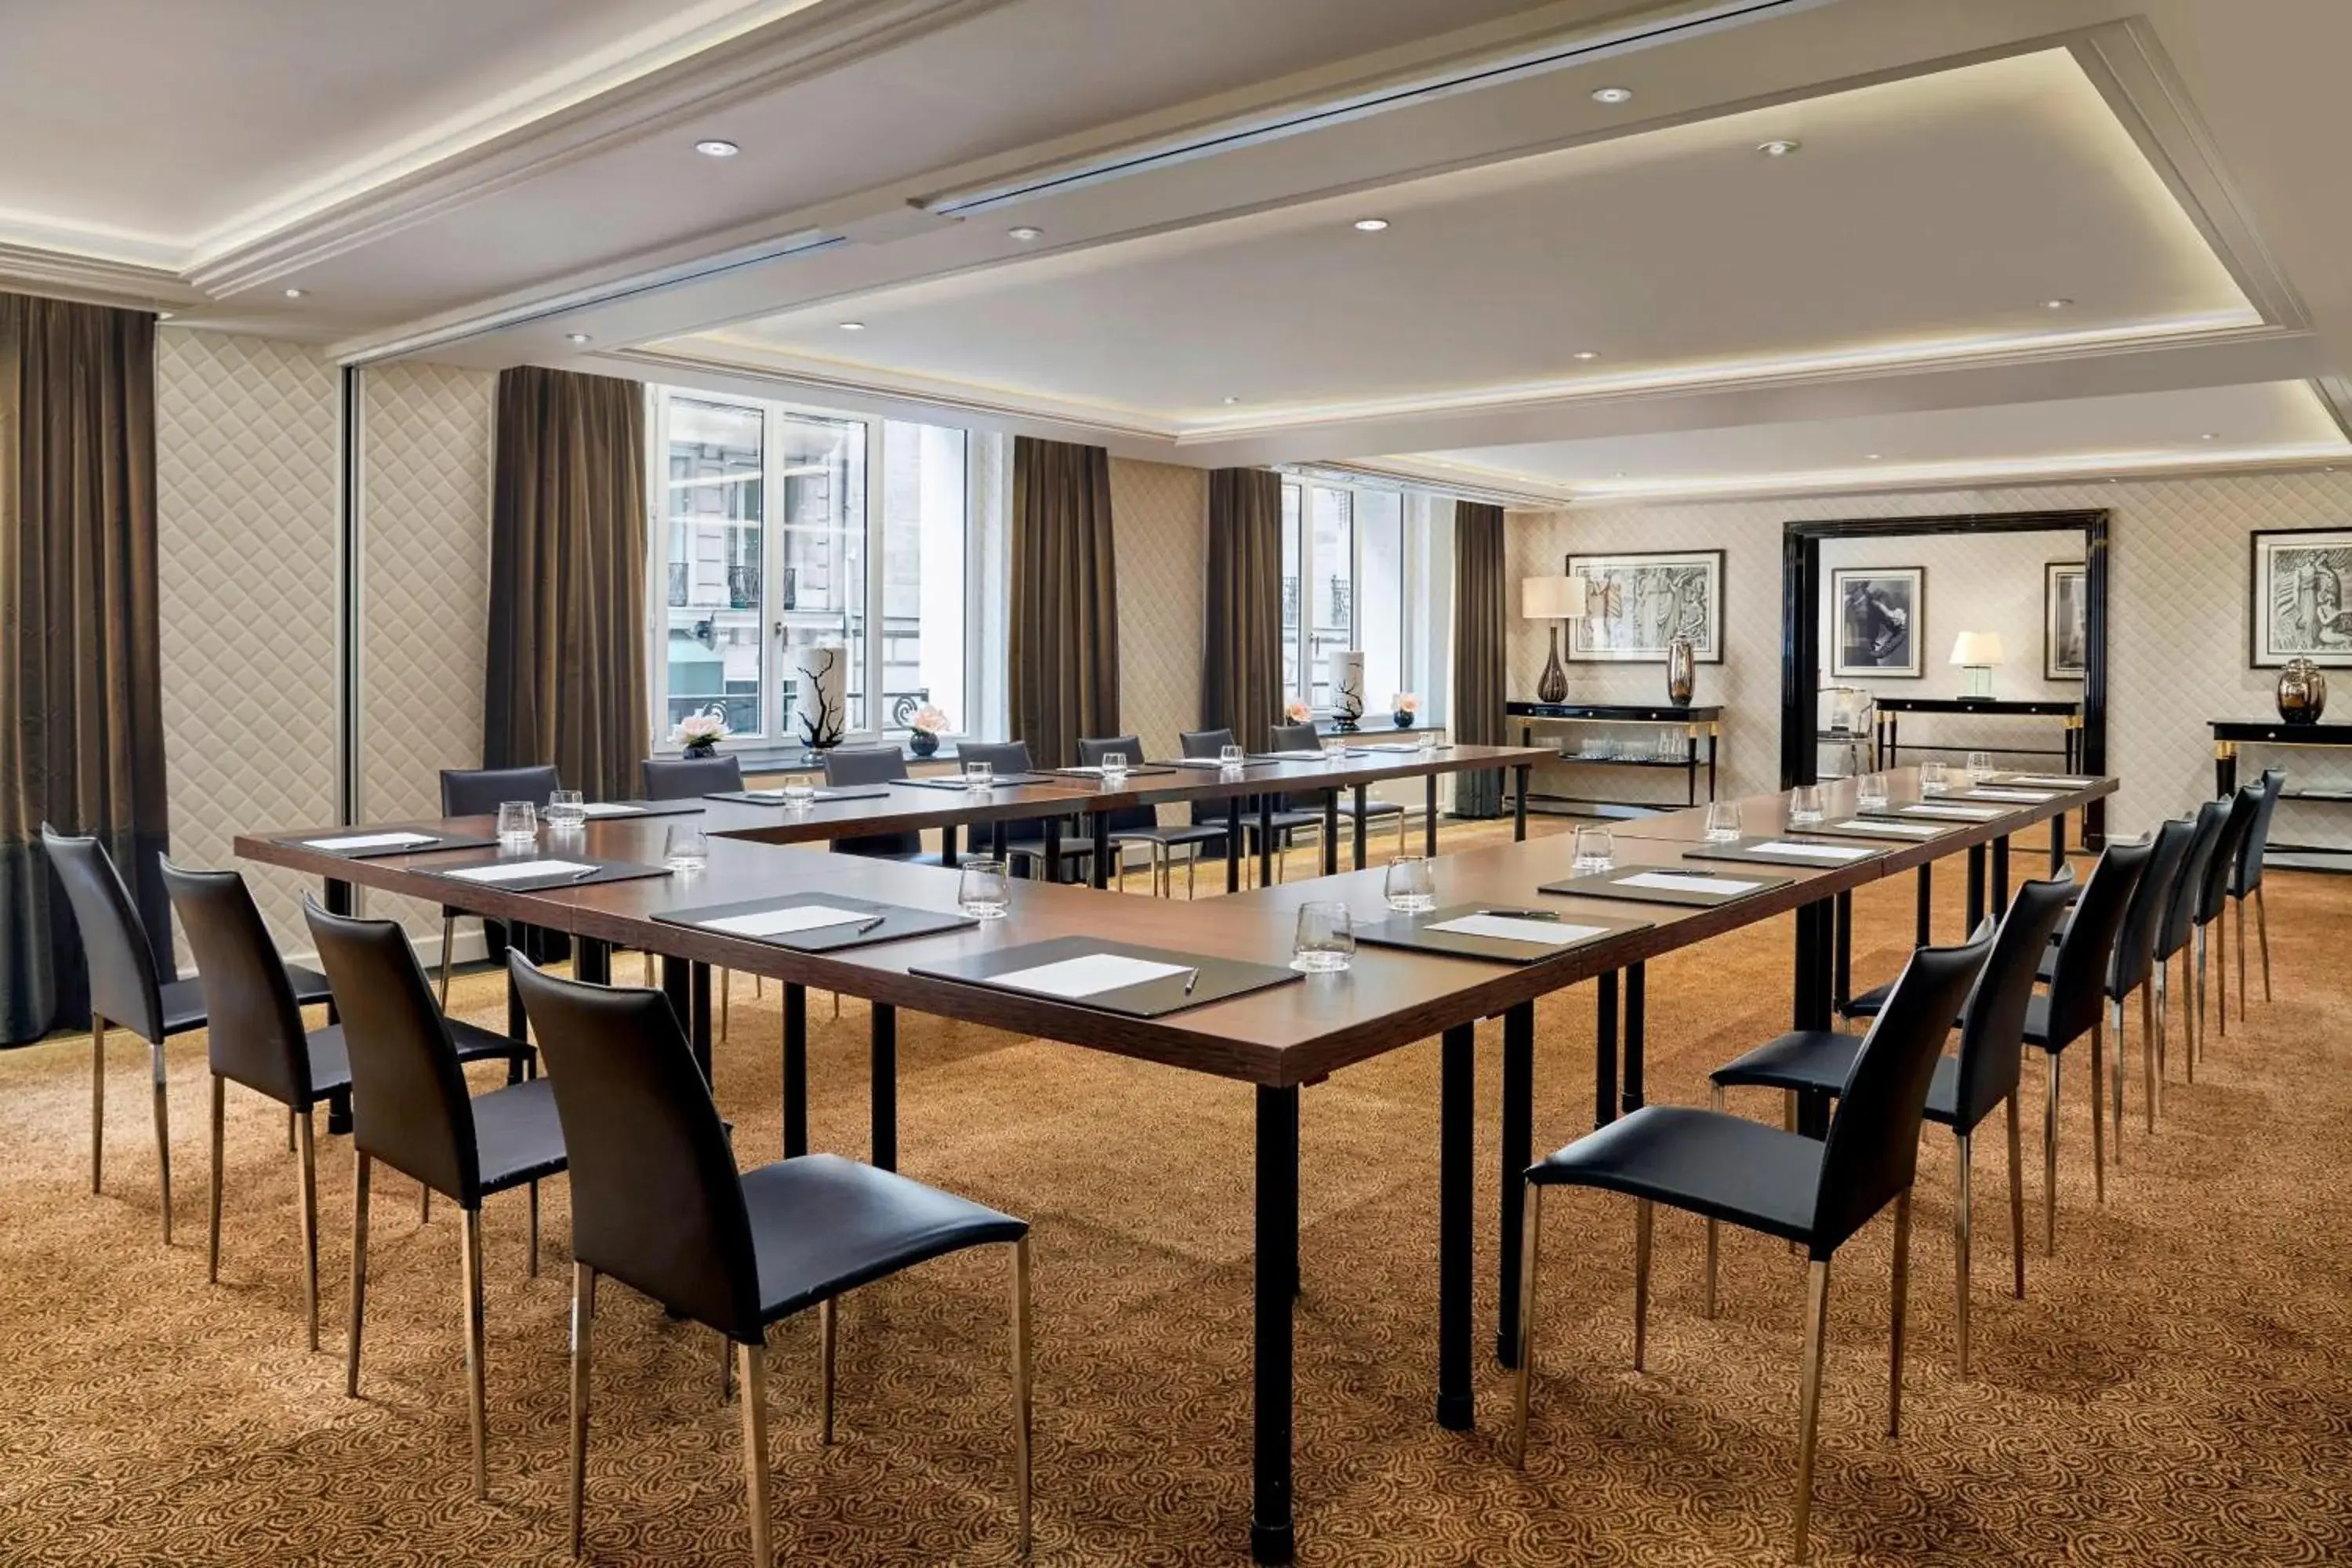 Meeting/conference room in Prince de Galles, a Luxury Collection hotel, Paris